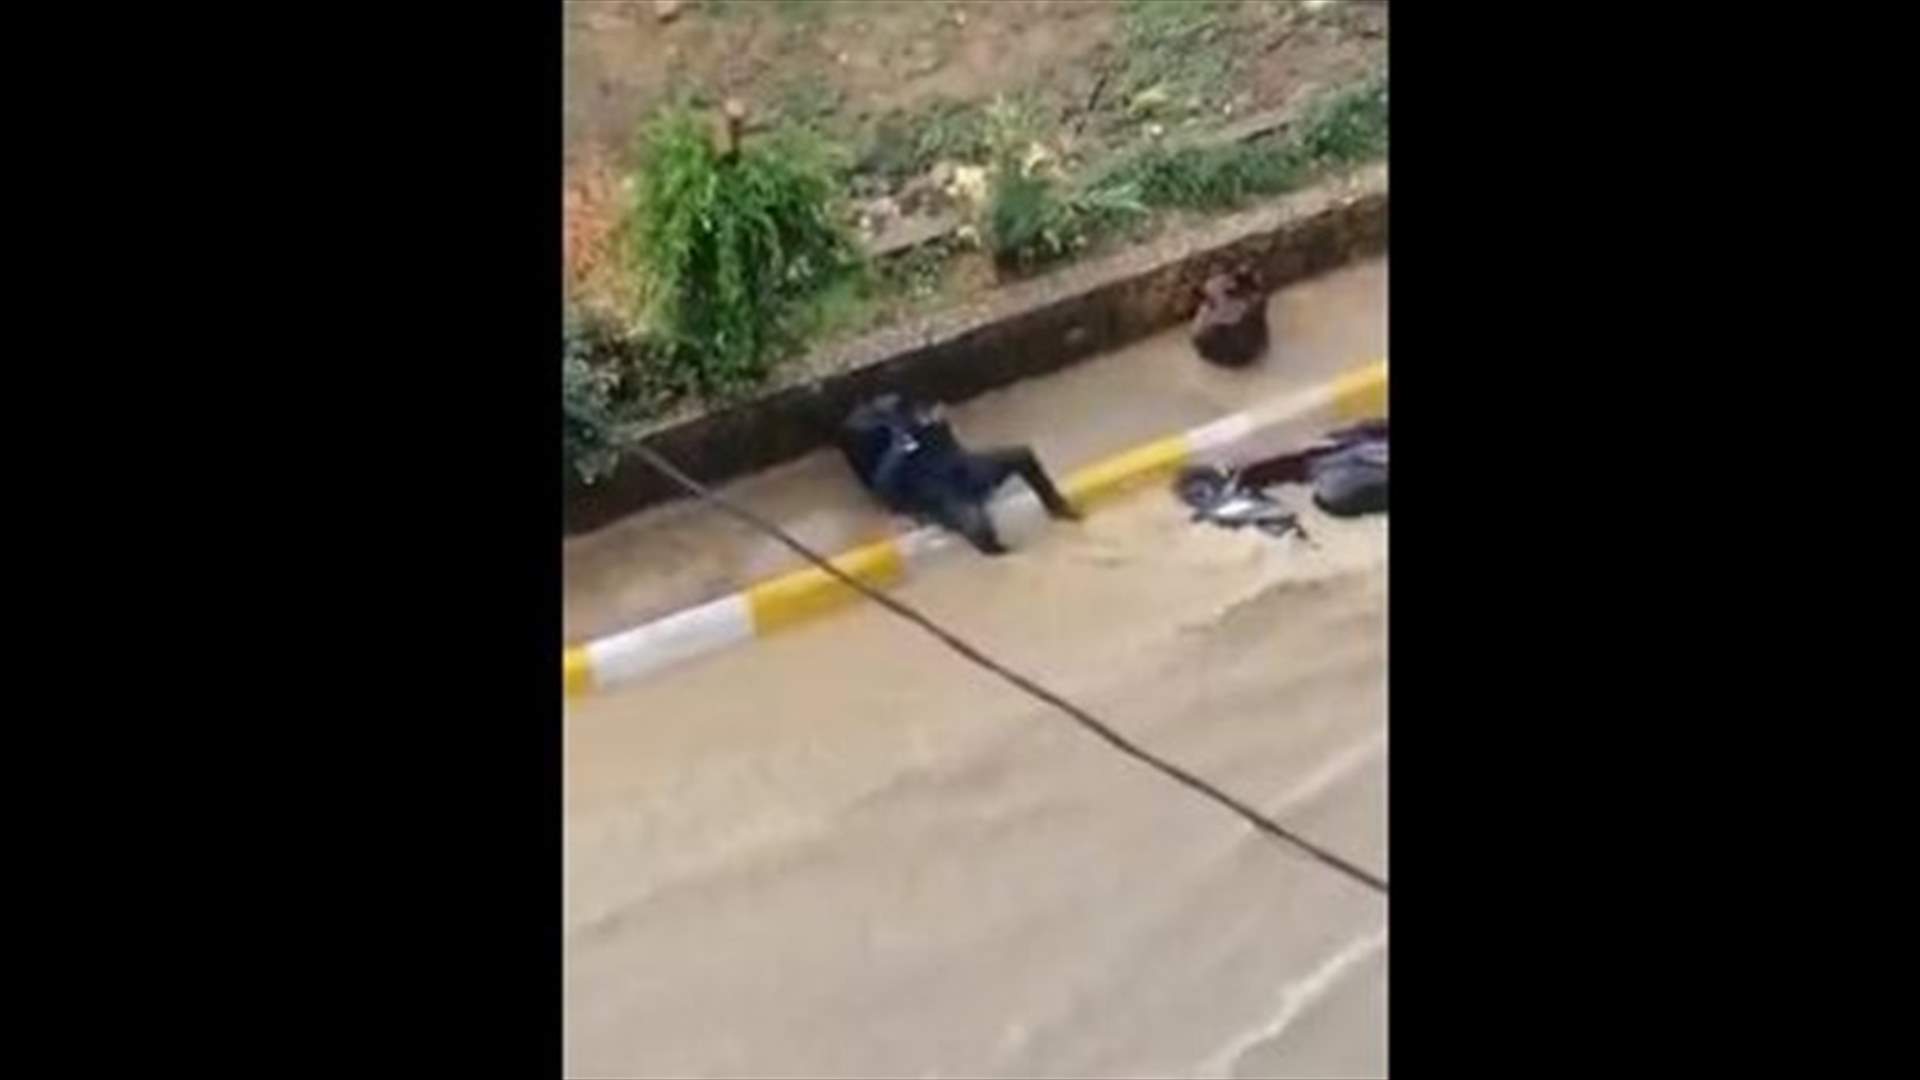 Motorcycle swept away in floods after rider falls off (Video)